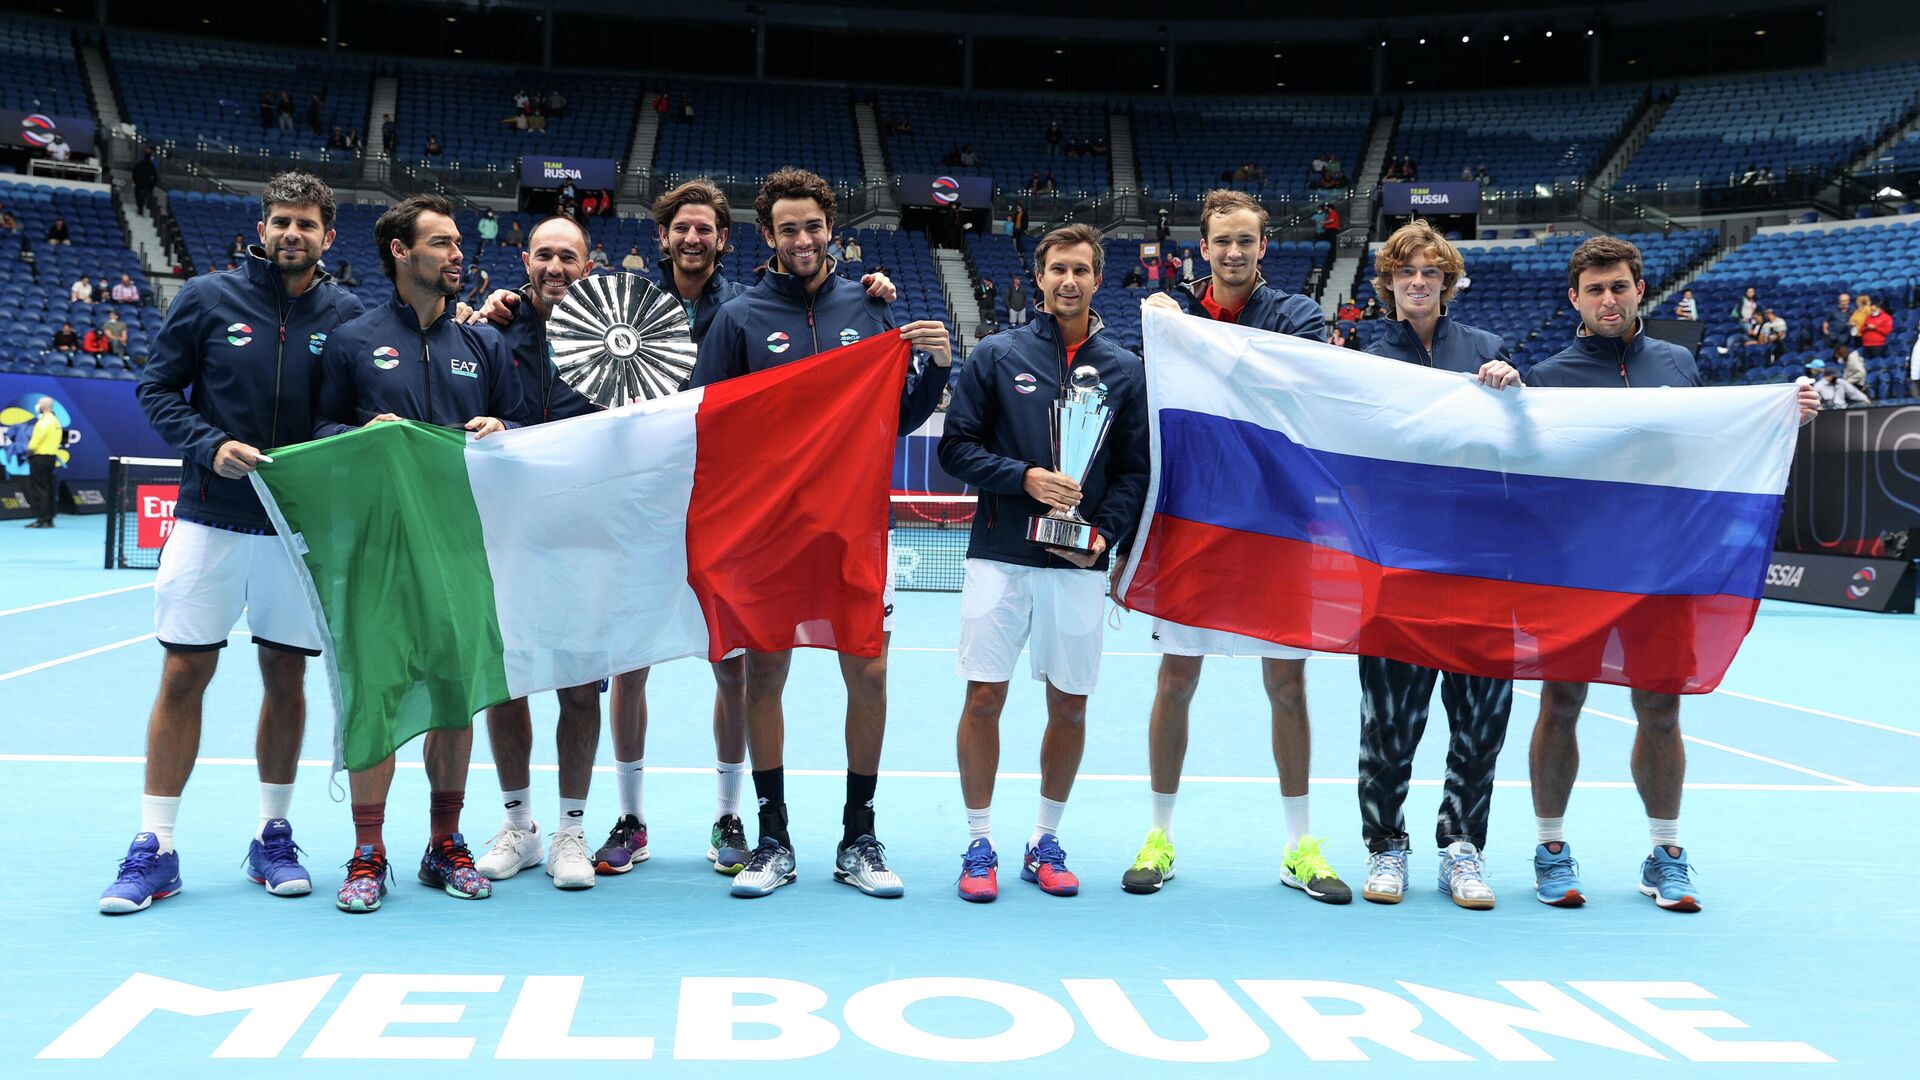 Tennis - ATP Cup - Melbourne Park, Melbourne, Australia, February 7, 2021 Russia's Daniil Medvedev, Andrey Rublev, Aslan Karatsev and Evgeny Donskoy celebrate winning the ATP Cup with the trophy after their final against Italy's Matteo Berrettini, Fabio Fognini, Simone Bolelli, Andrea Vavassori and captain Vincenzo Santopadre REUTERS/Loren Elliott - РИА Новости, 1920, 07.02.2021